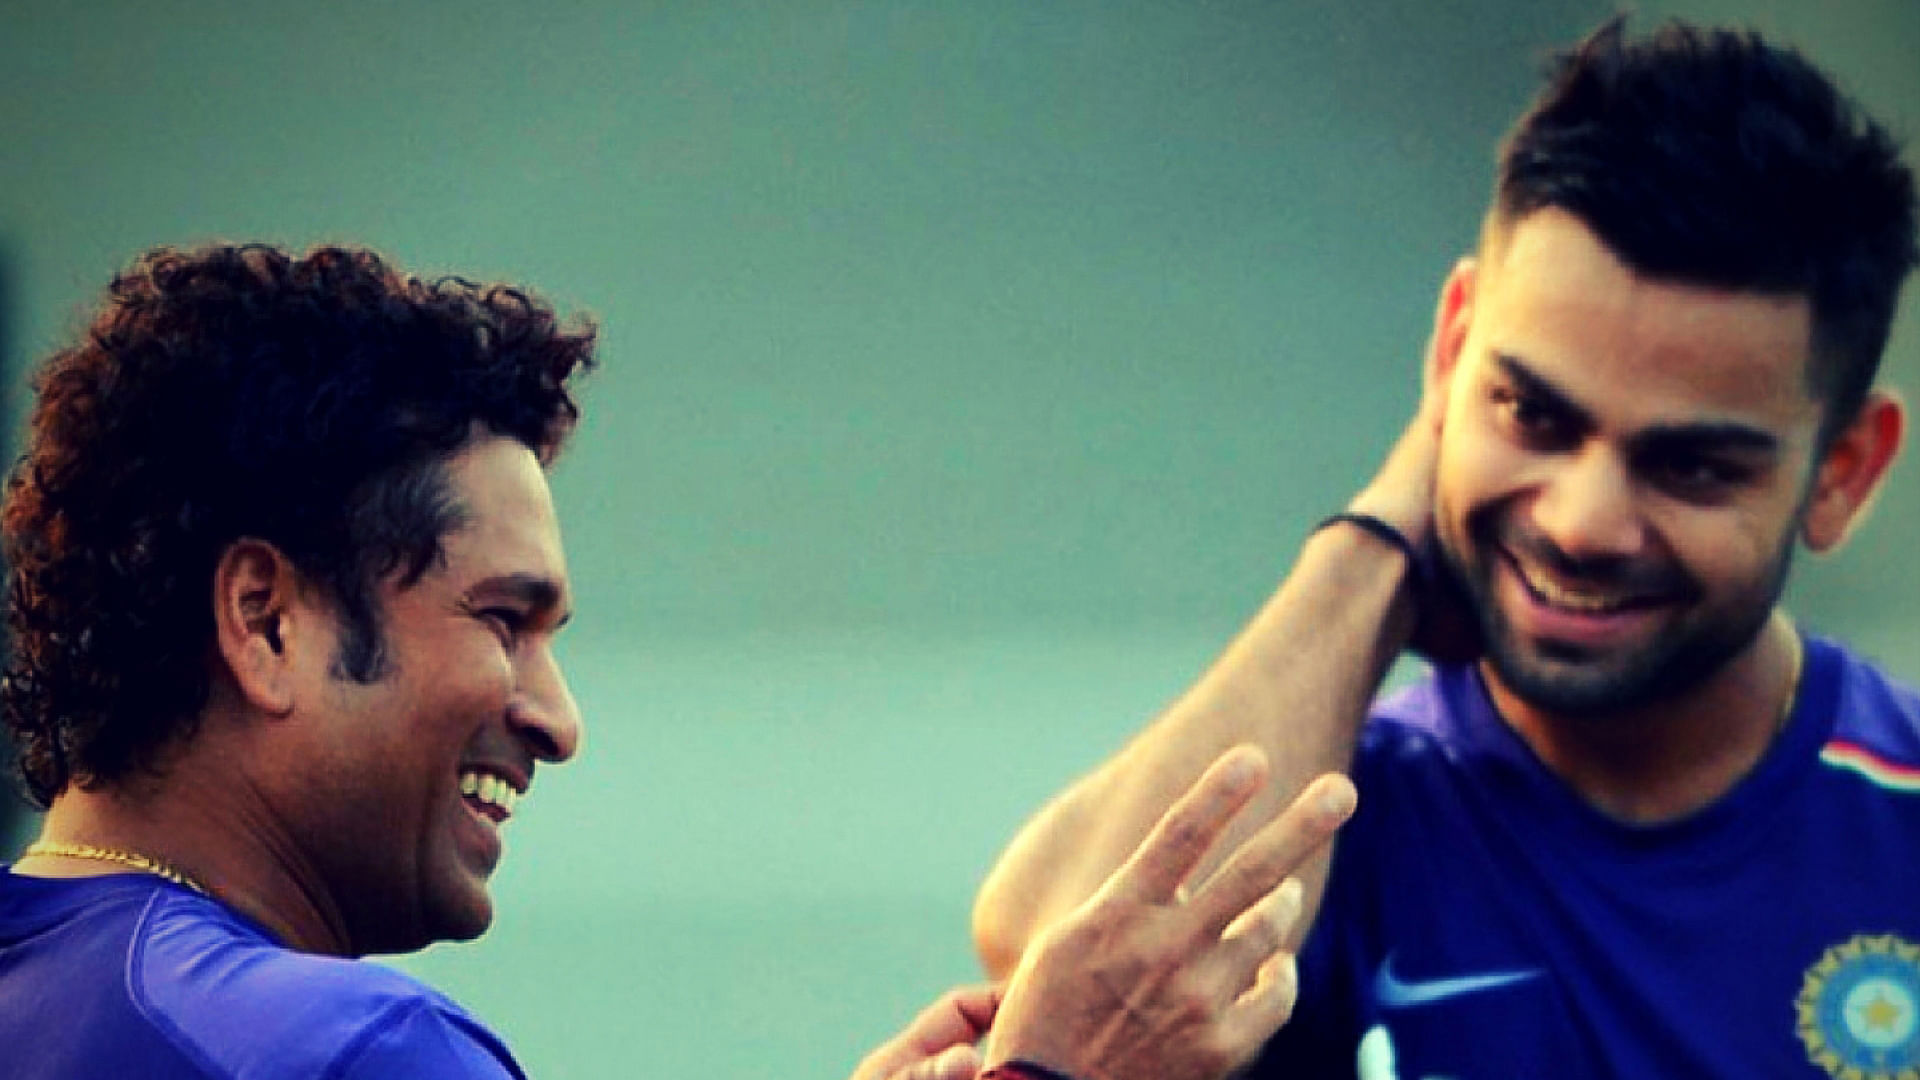 Sachin and Virat should be appreciated collectively, writes Gautam Gambhir. (Photo altered by <b>The Quint</b>)